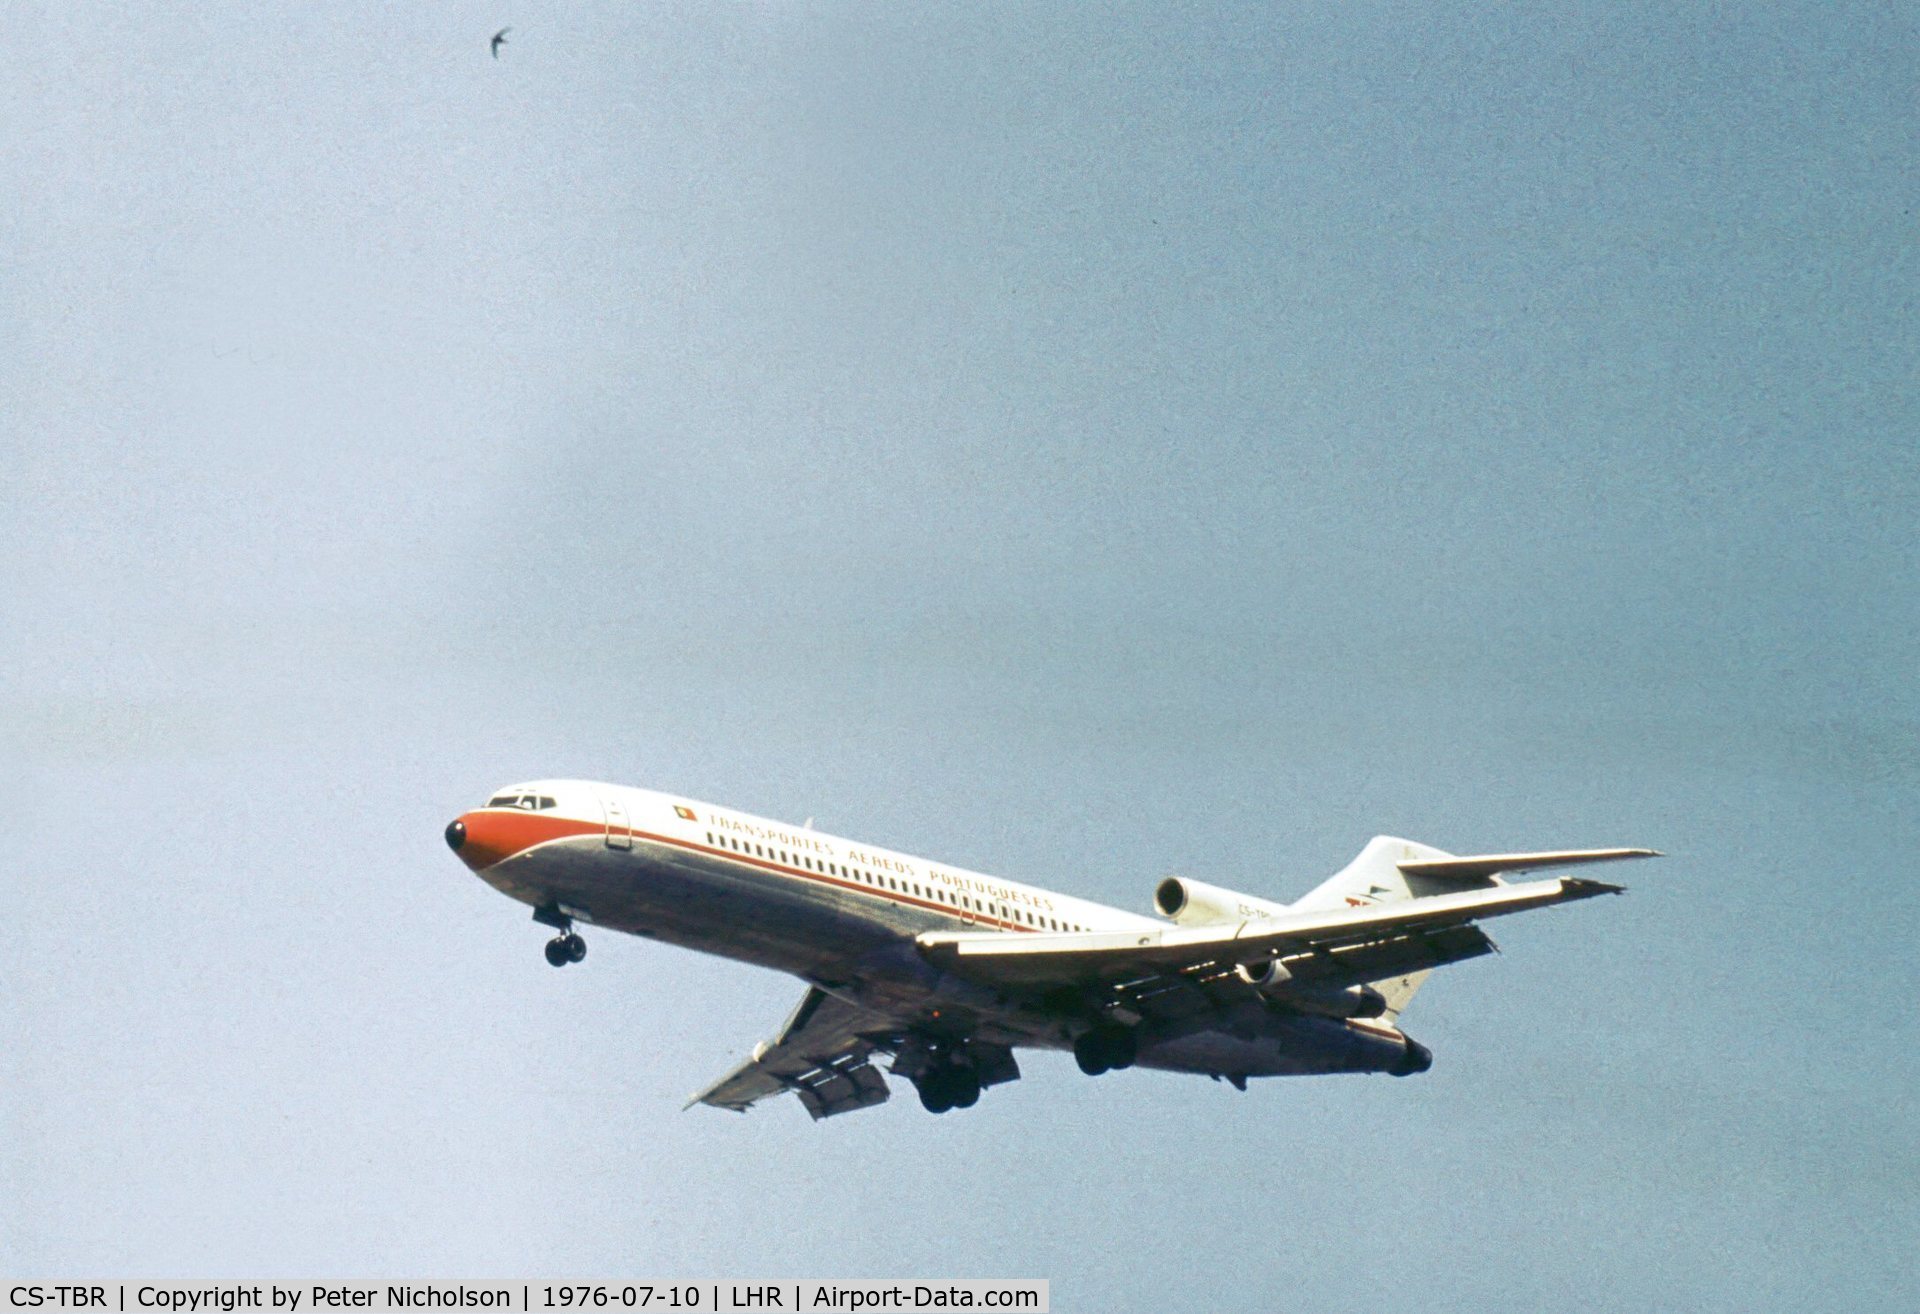 CS-TBR, 1974 Boeing 727-282 C/N 20972, Boeing 727-282 of Portuguese airline TAP on final approach to London Heathrow in the Summer of 1976.